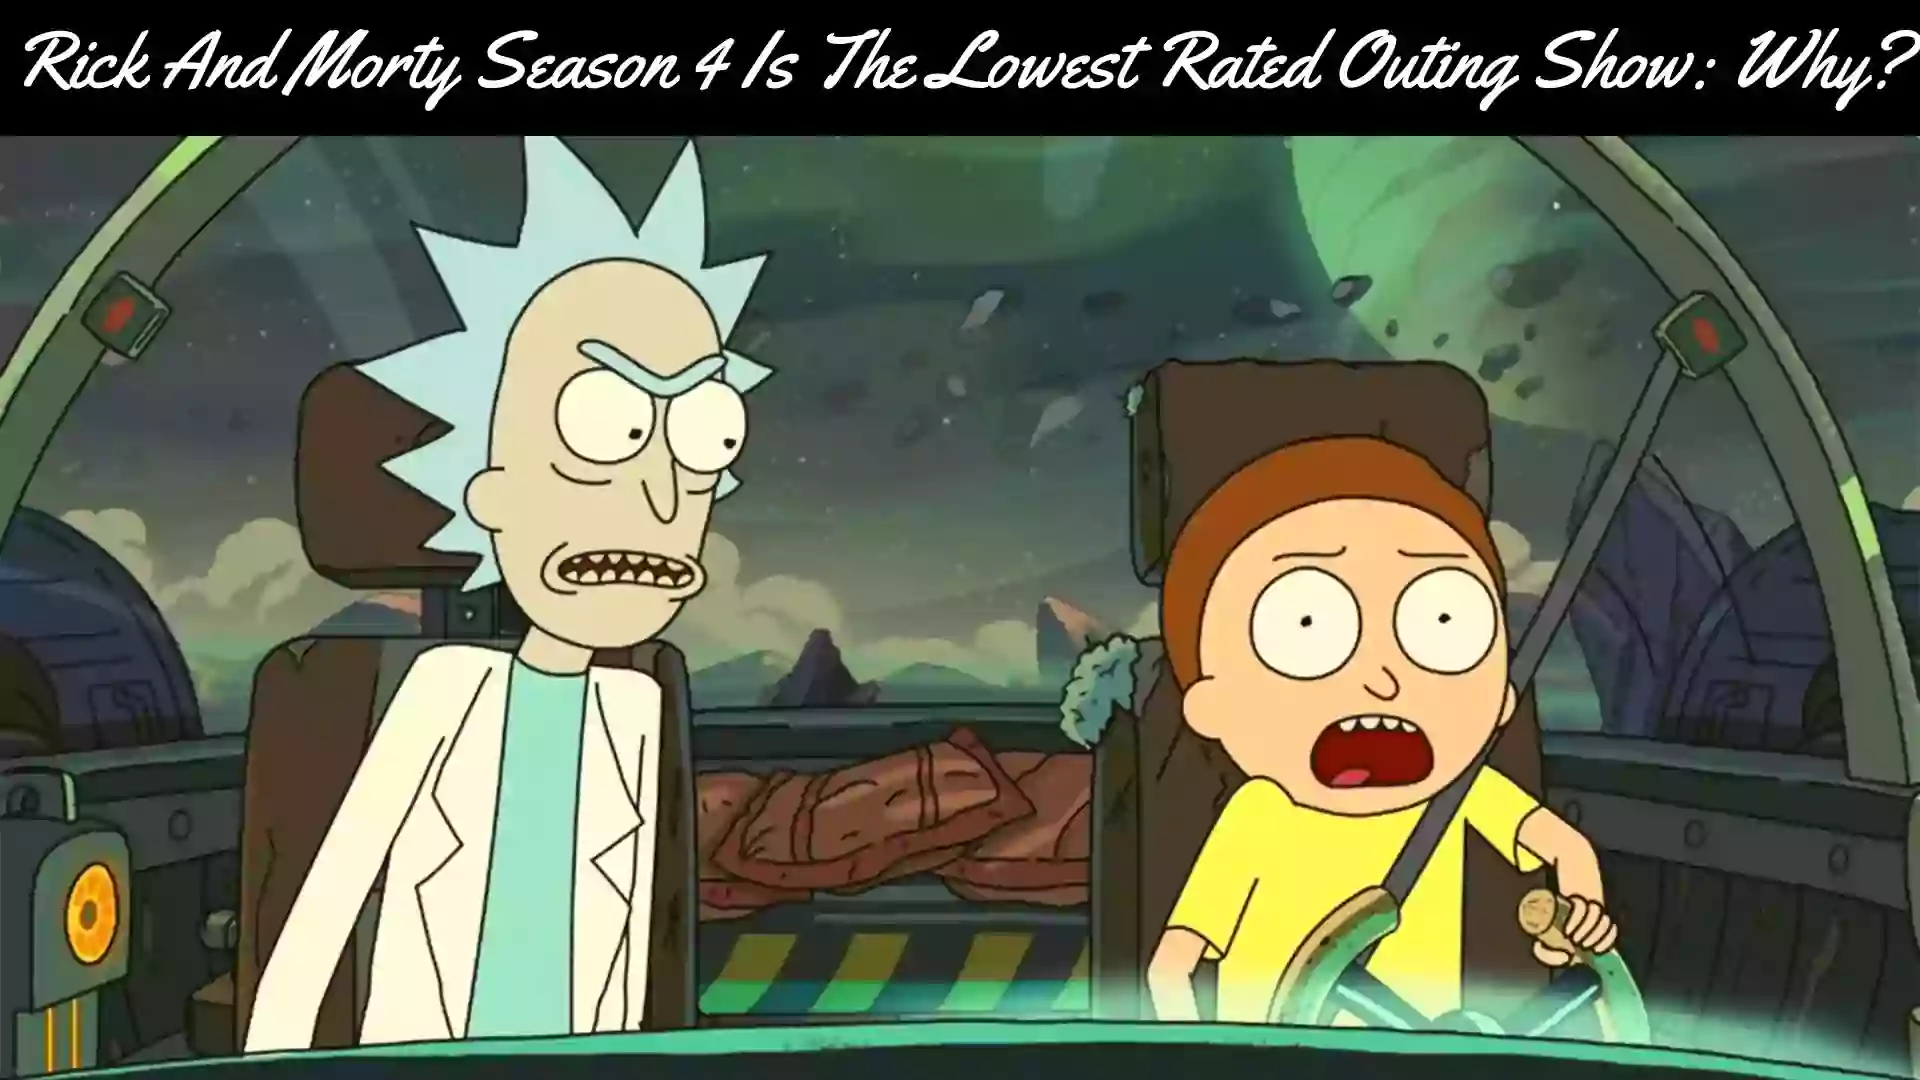 Rick And Morty Season 4 The Lowest Rated Outing Show Why?